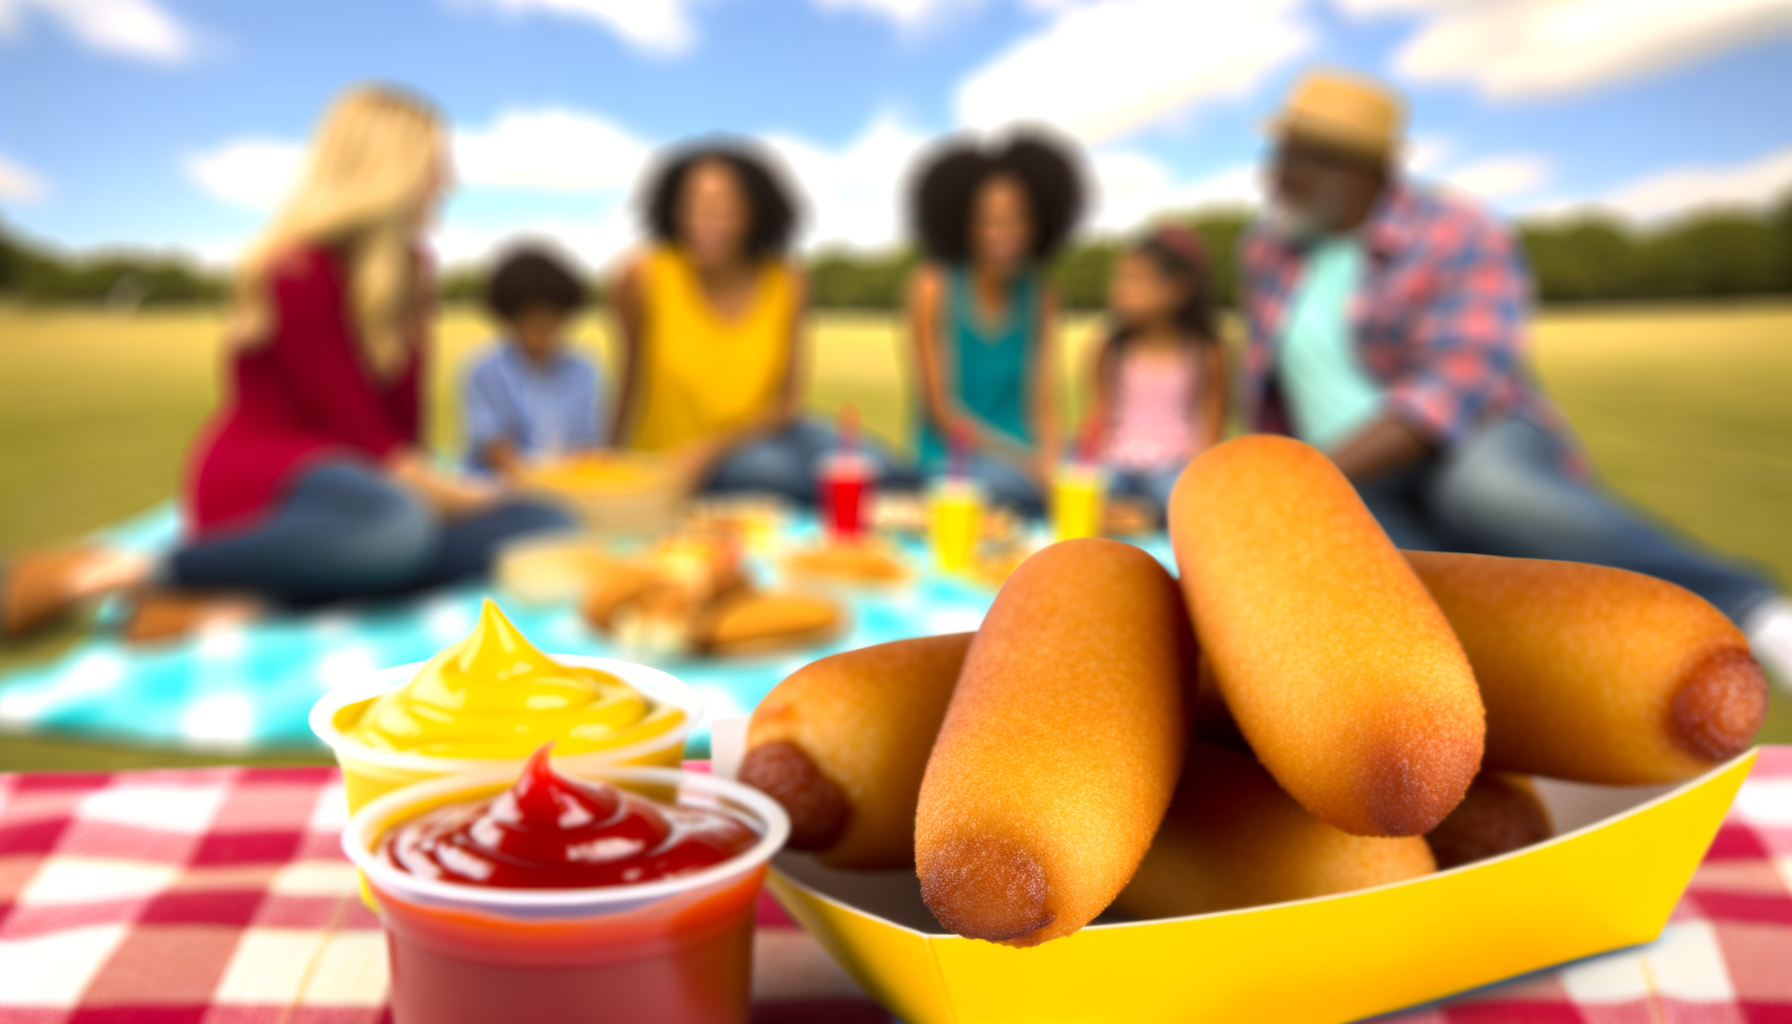 Golden-brown corn dogs with mustard and ketchup on the side at a family picnic